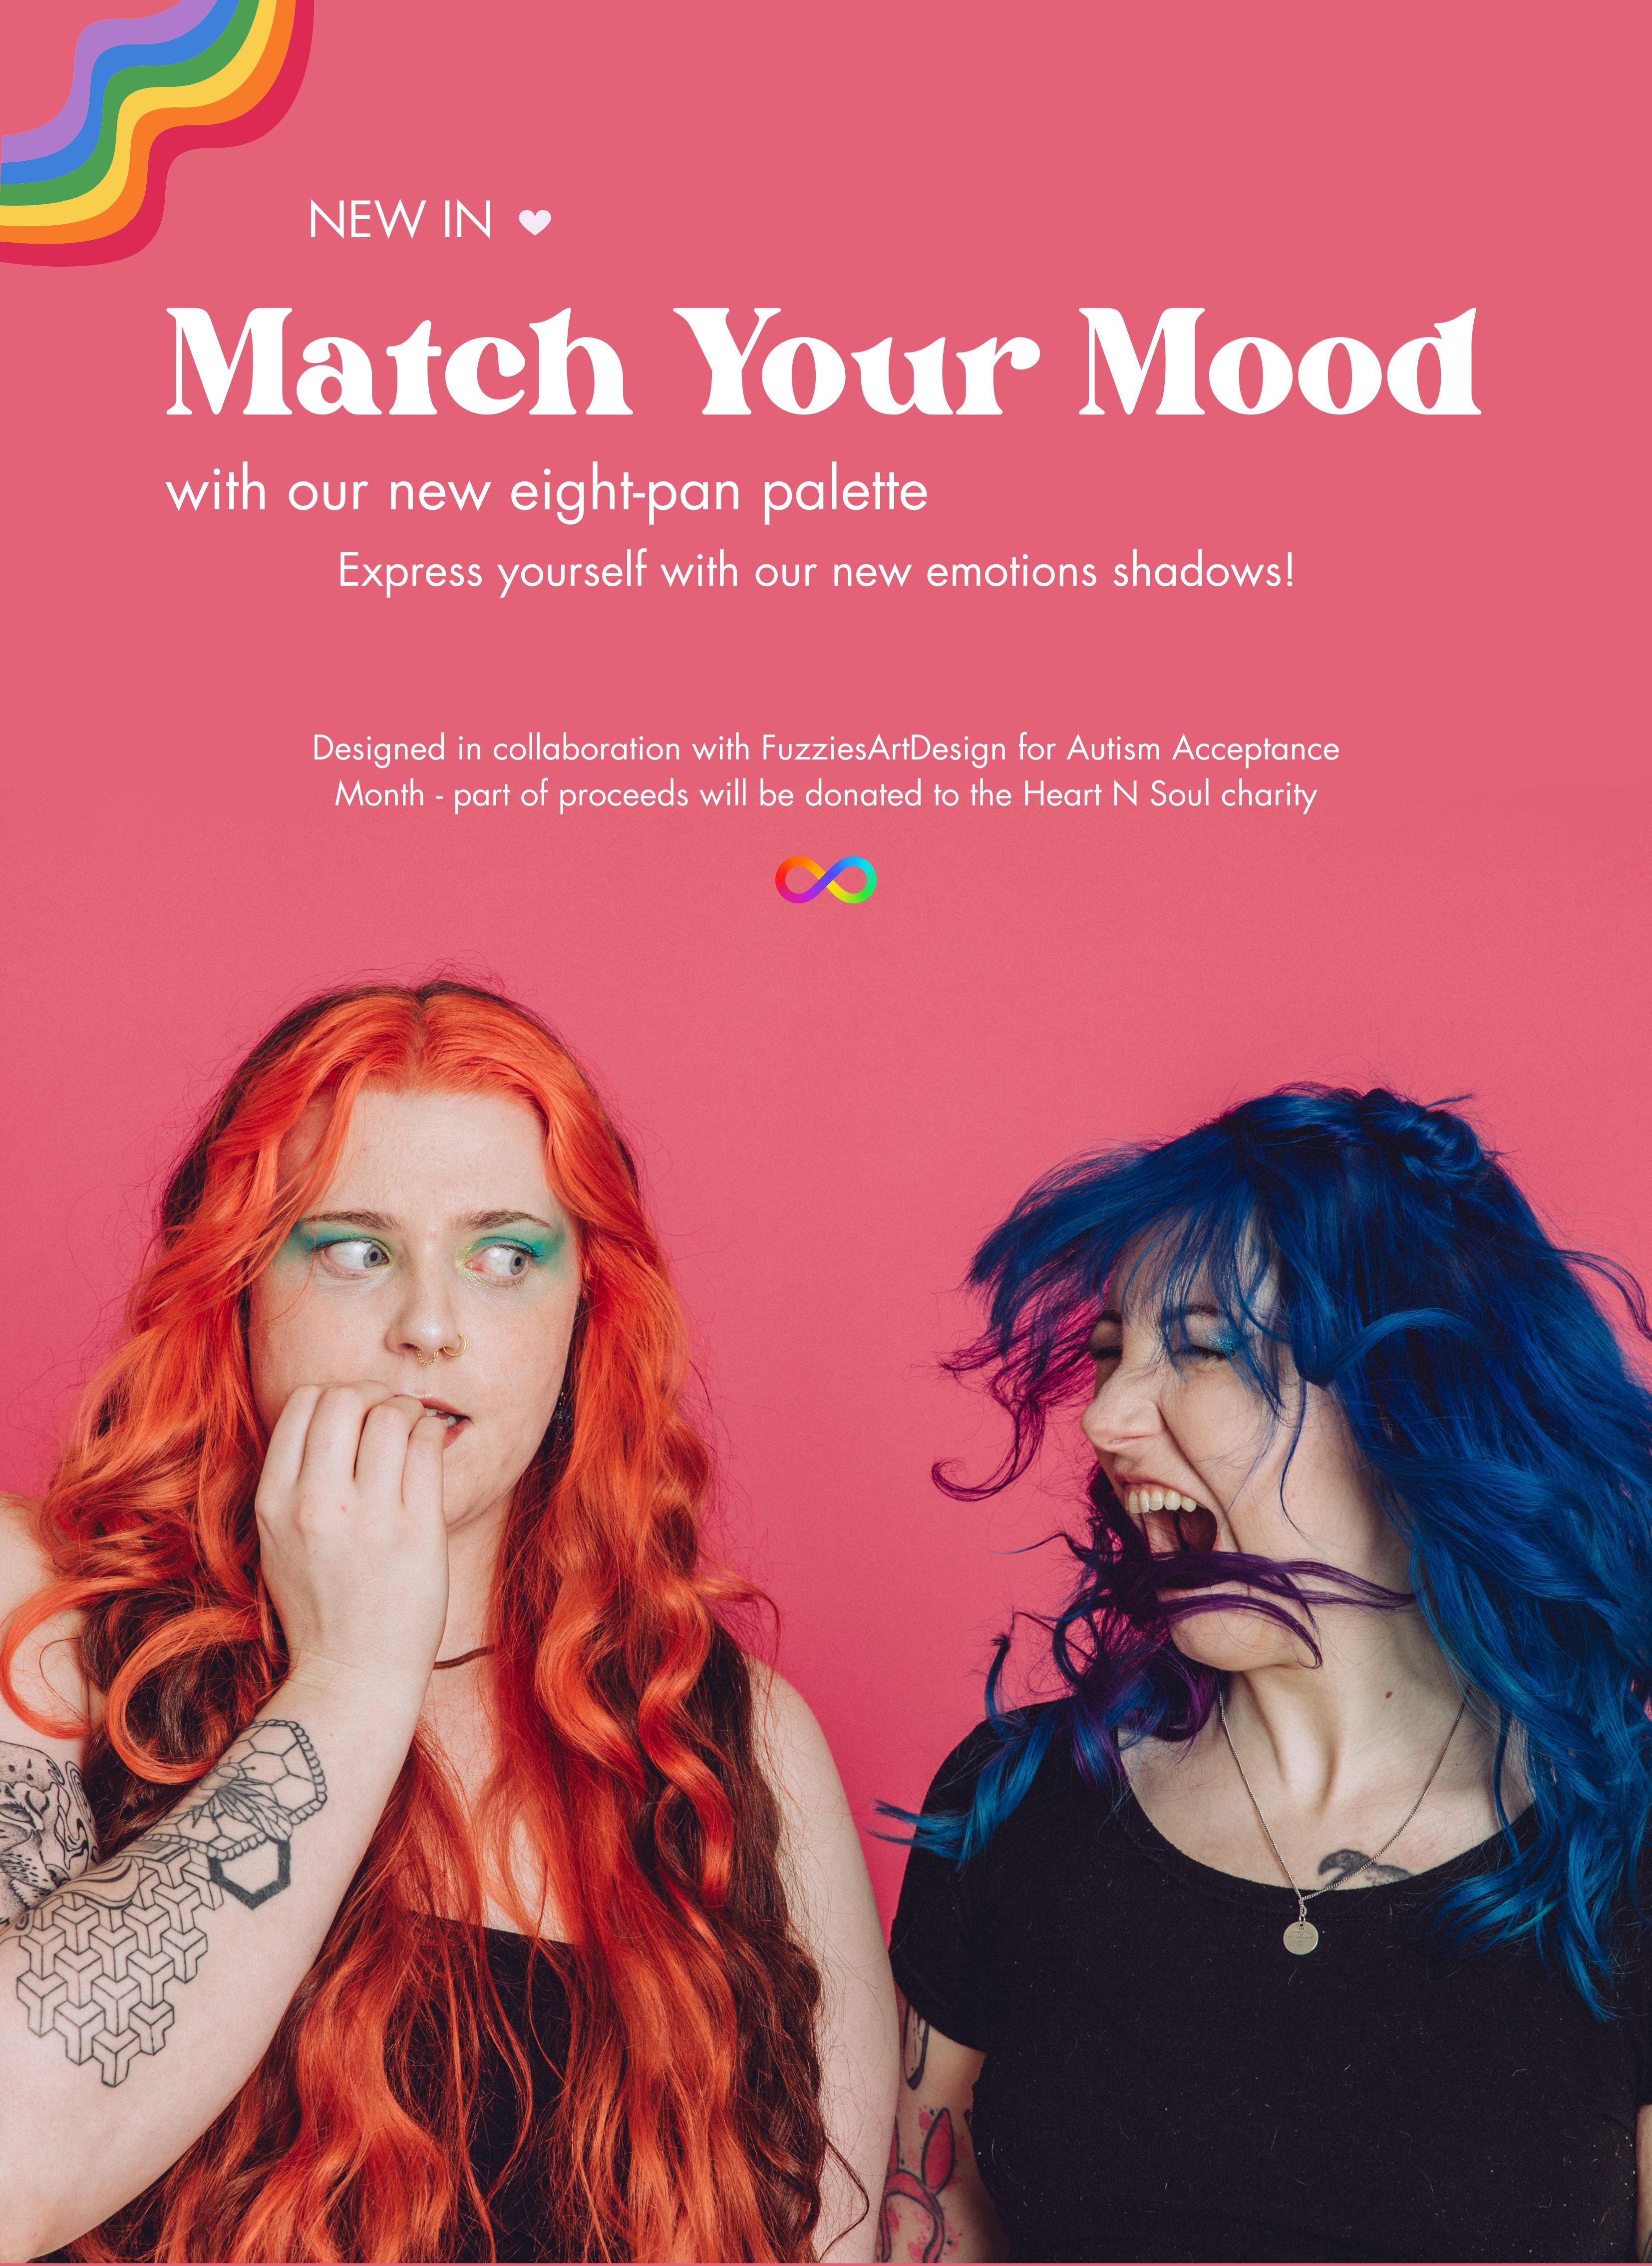 A picture of two people wearing colourful makeup and mimicking being surprised and excited - next to them is a text that reads Match Your Mood with our new eight-pan palette. Express yourself with our new emotions shadows! designed with FuzziesArtDesign for Autism Acceptance Month, part of proceeds will be donated to the Heart N Soul charity.